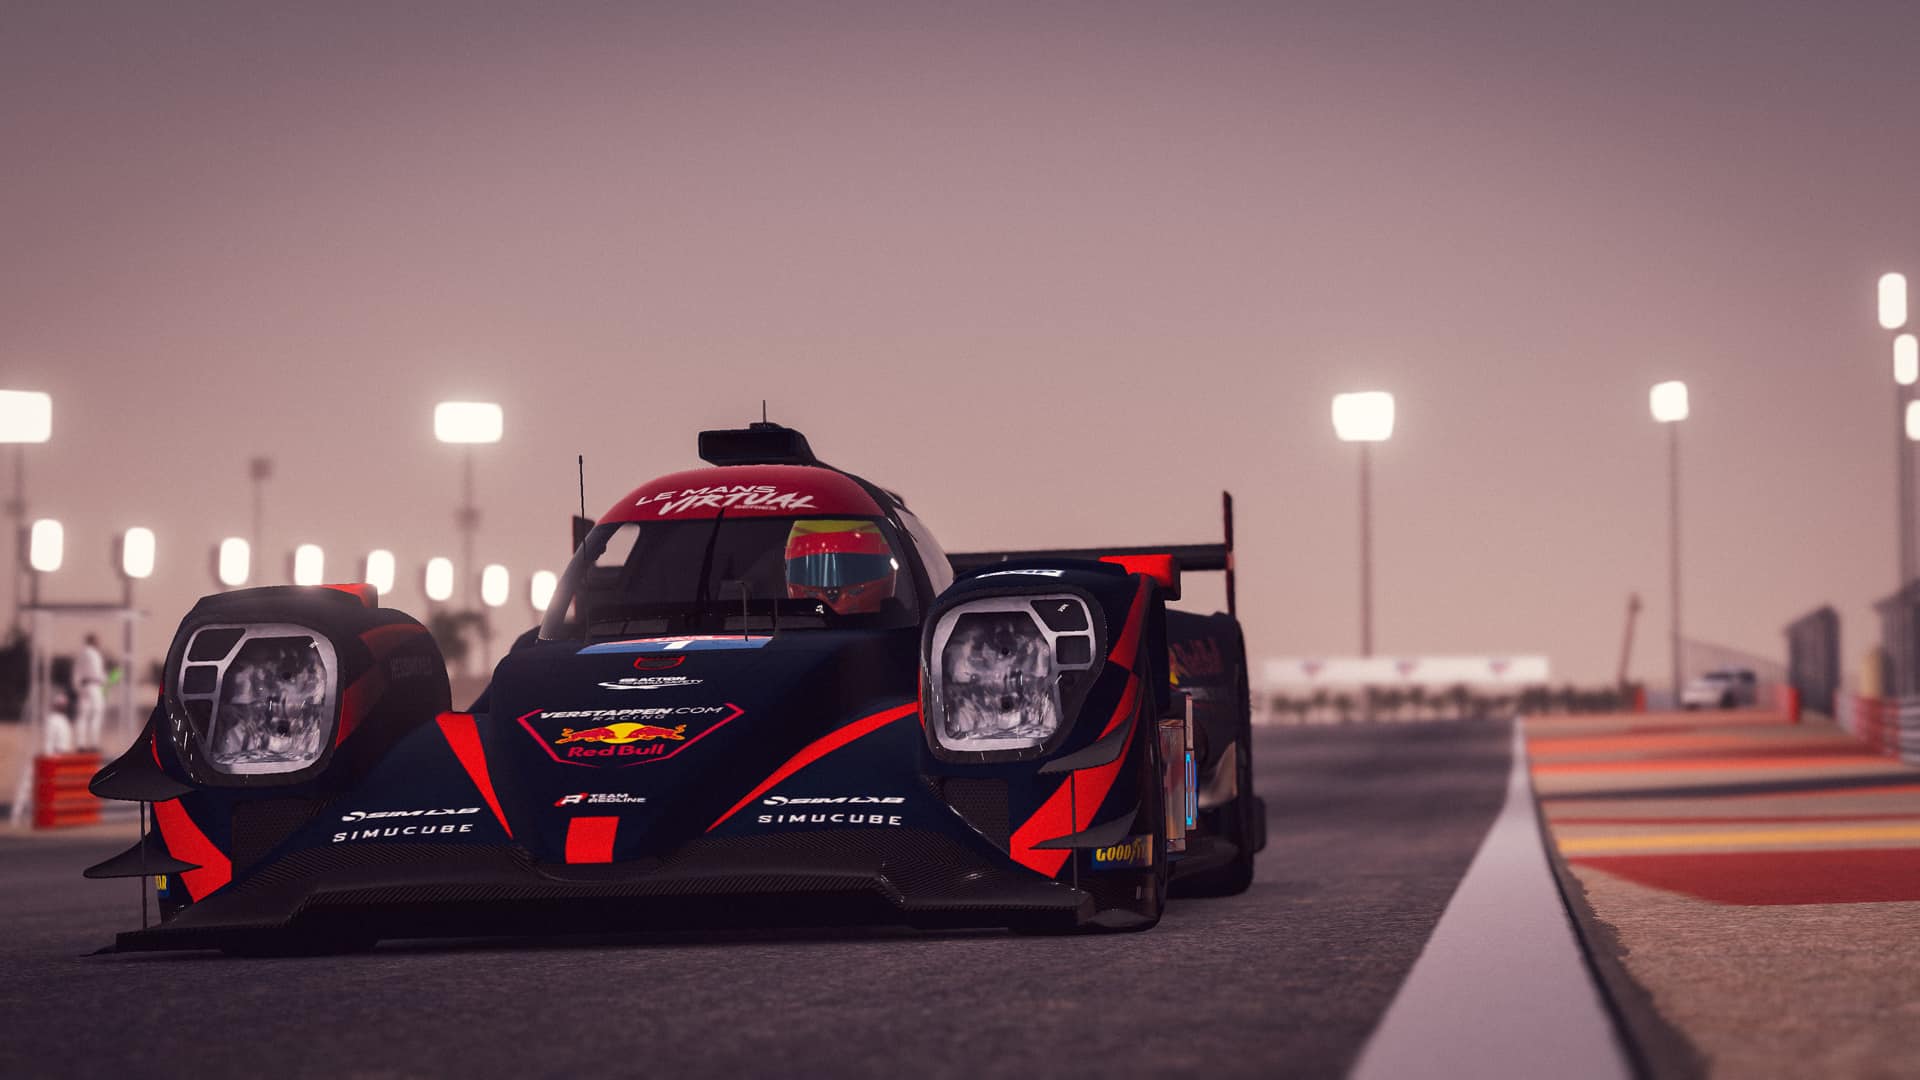 The Redline team wins the two poles during qualifying for the Le Mans Virtual Series in Bahrain